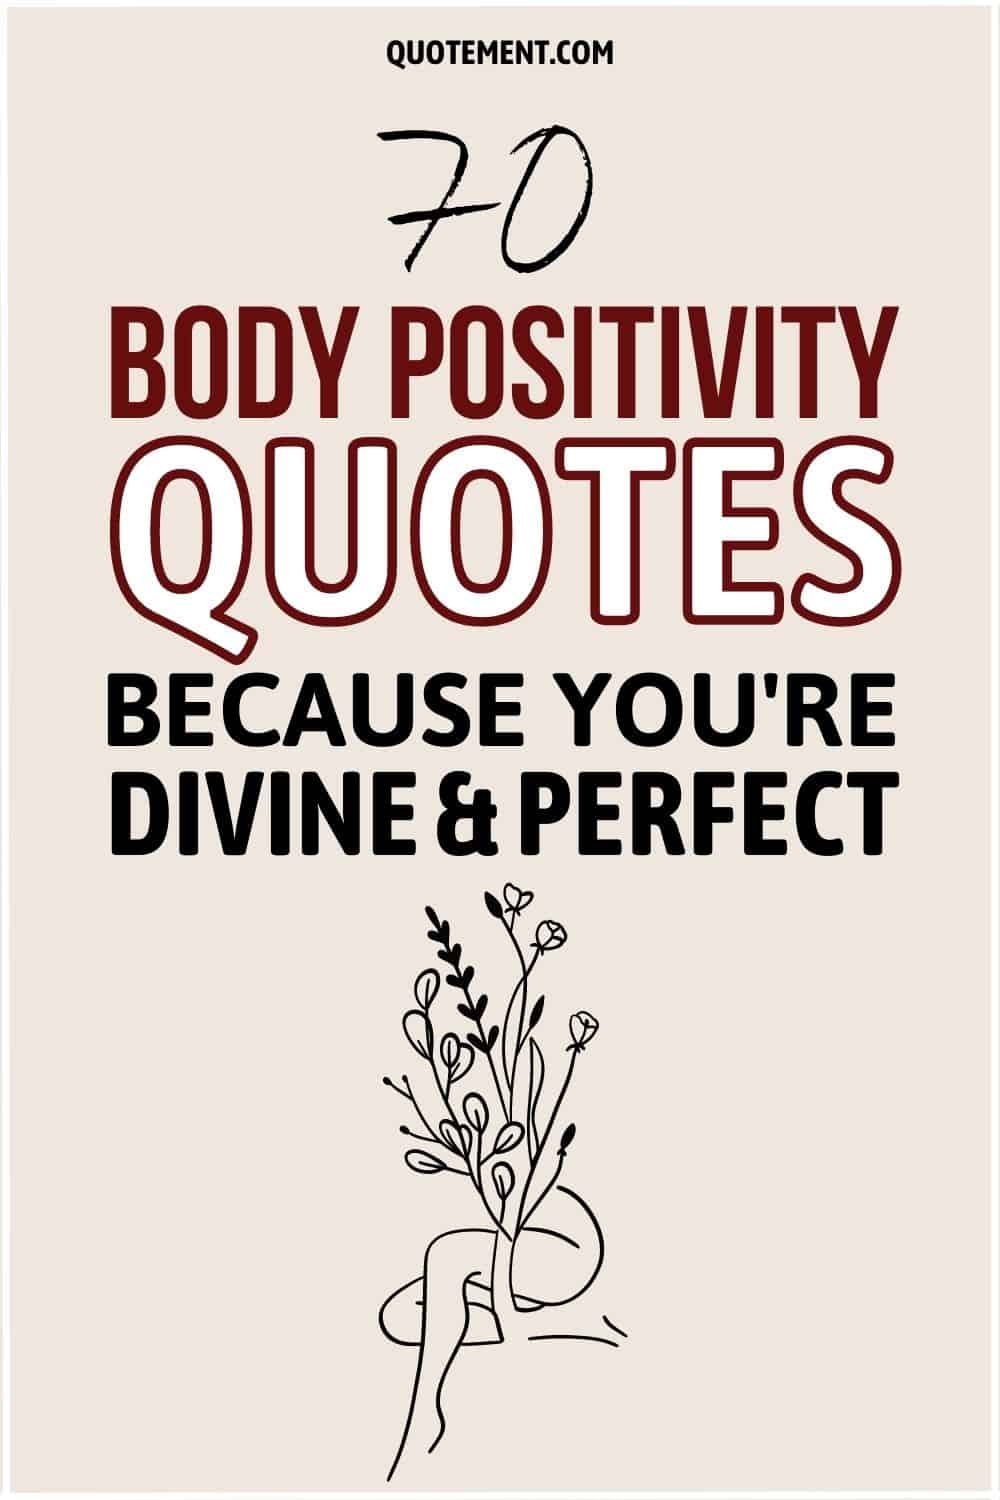 70 Body Positivity Quotes Because You're Divine & Perfect
